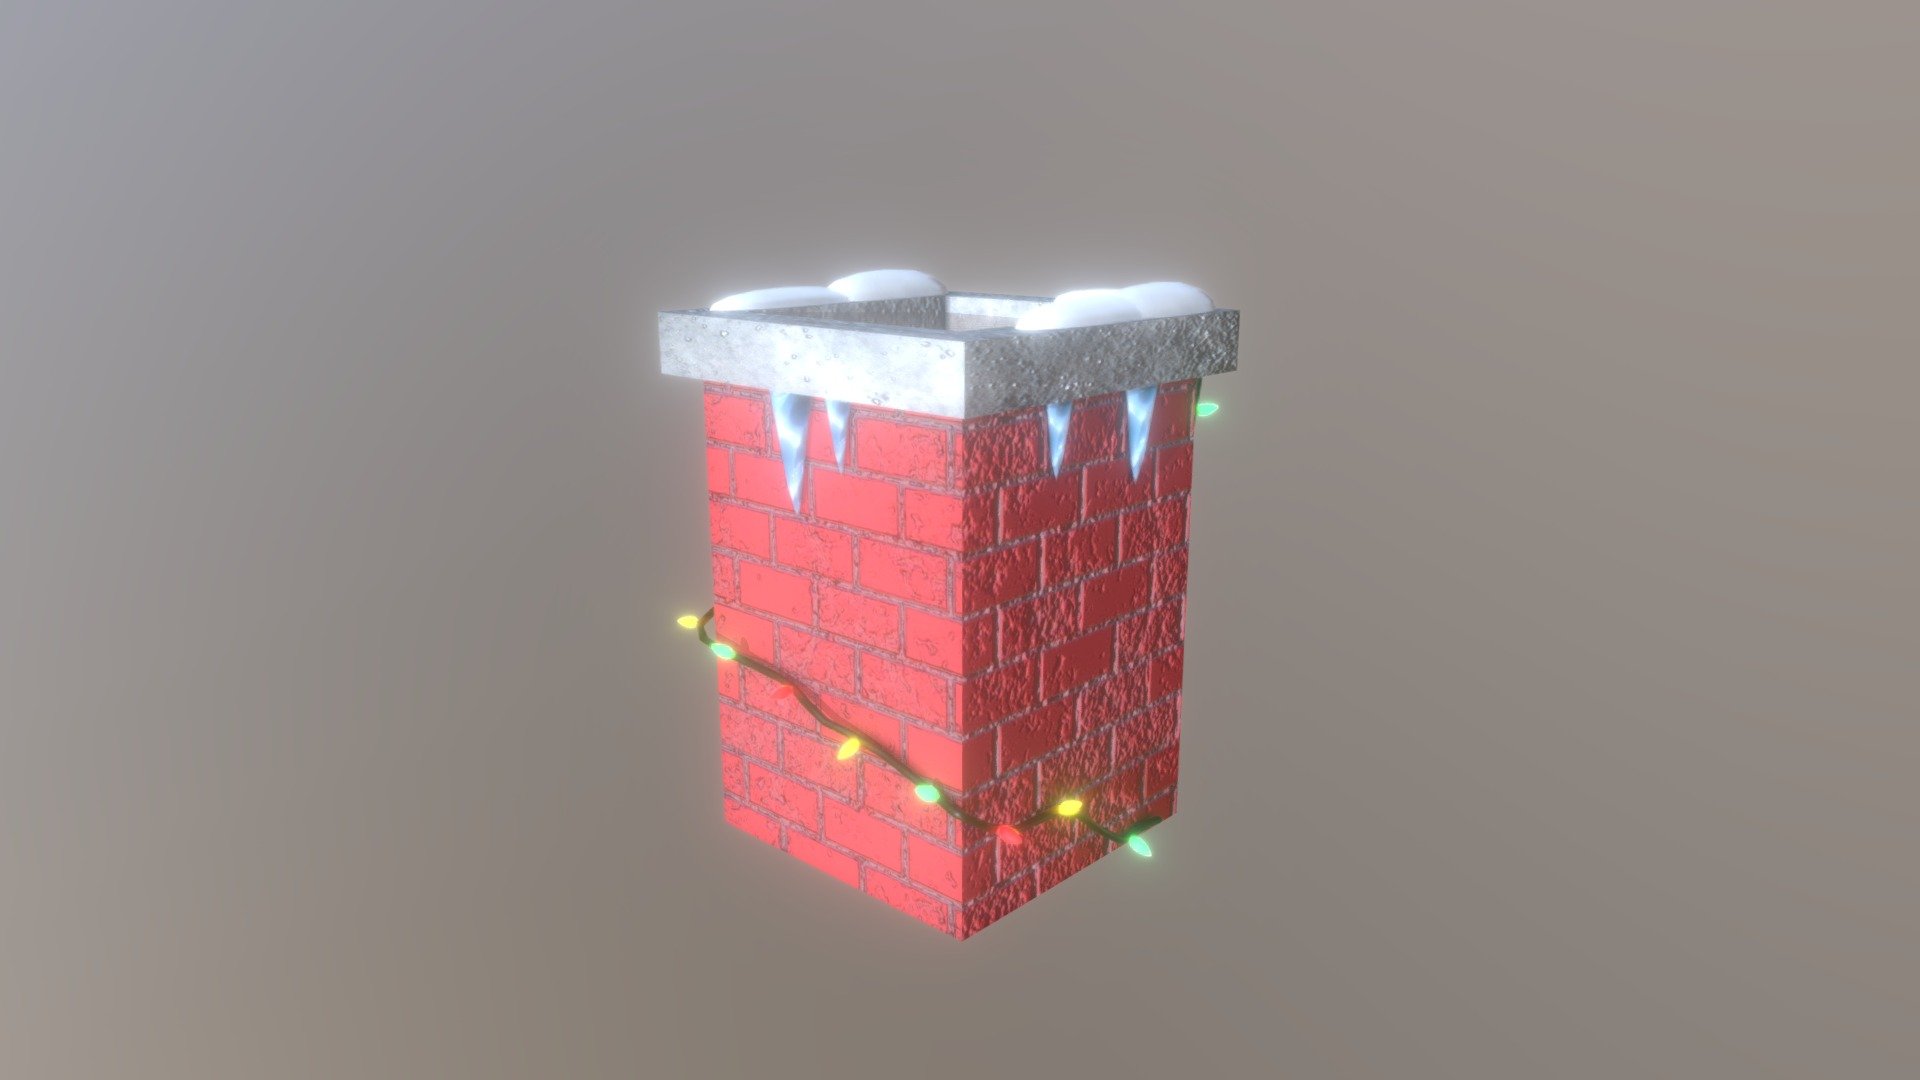 Idk how i feel about this one. I made the brick texture in substance designer, which i always try to get more practice in, but the normals are pretty strong 3d model